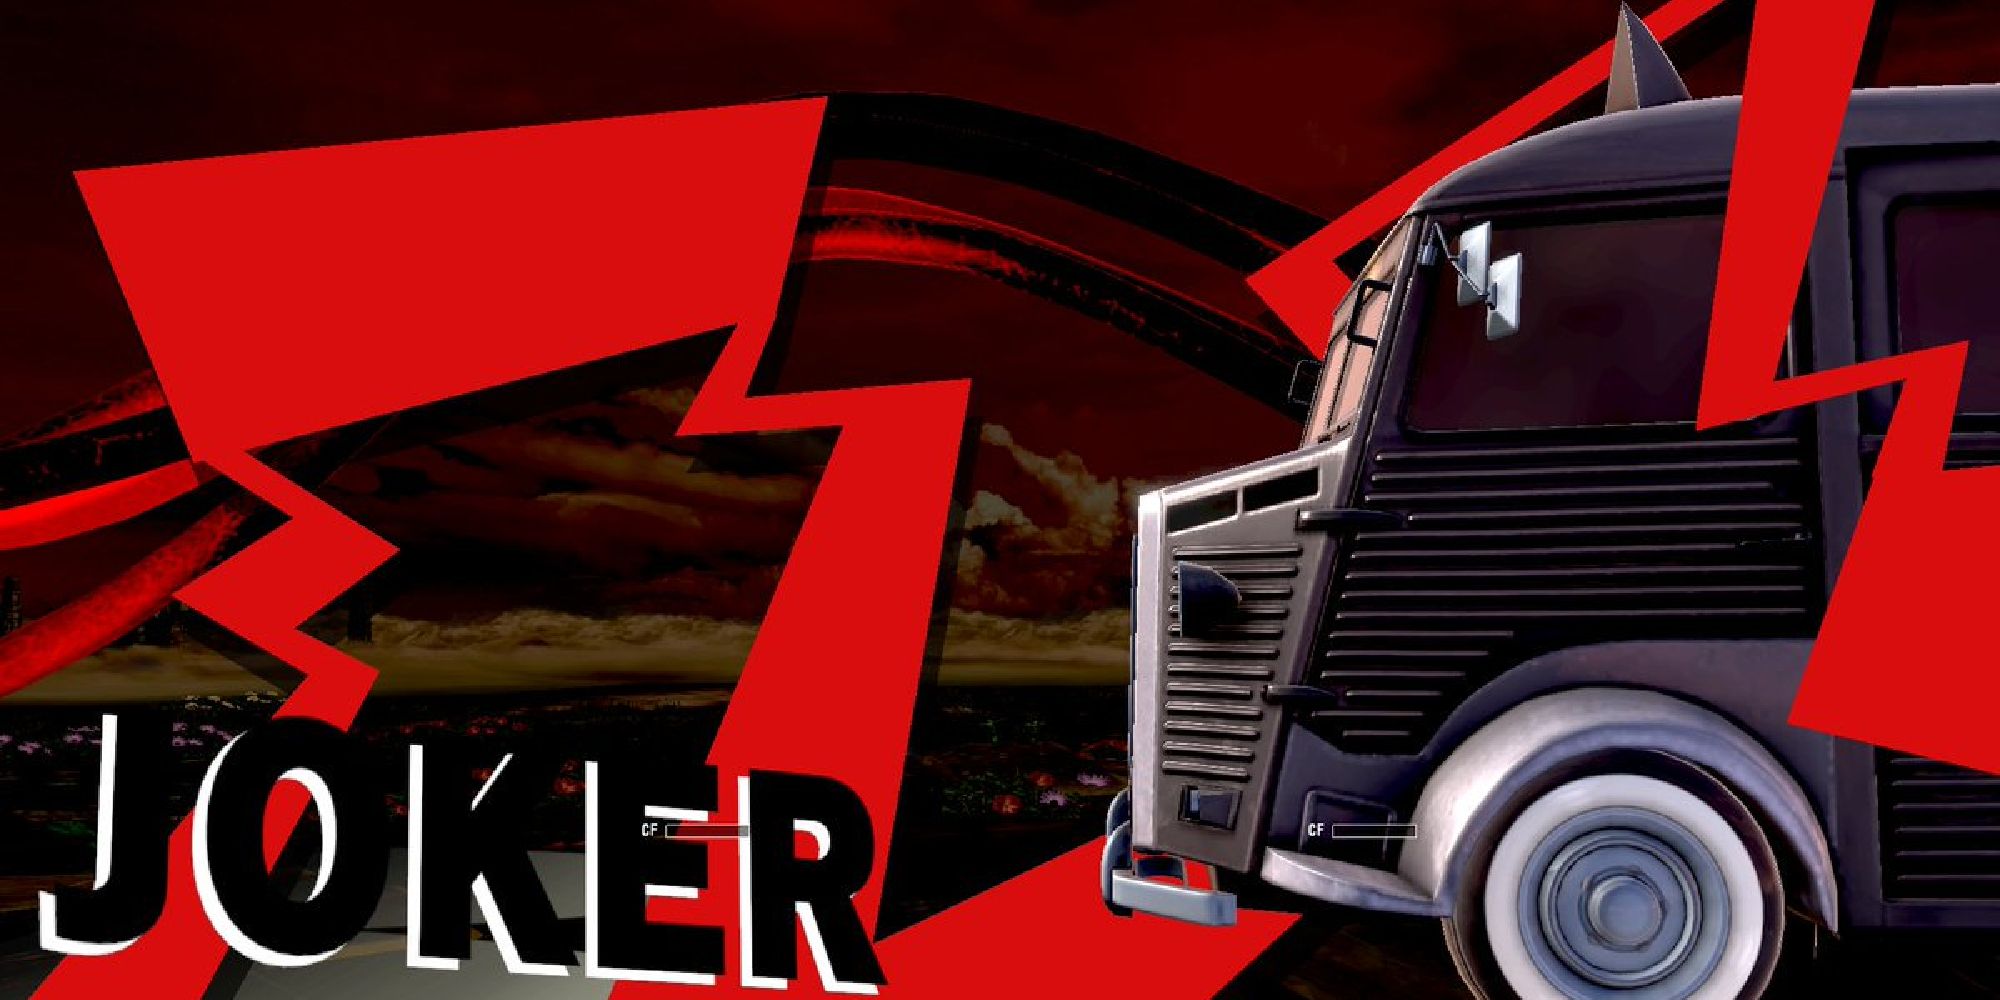 Joker's victory screen showing the Morganamobile driving surrounded by red graphics